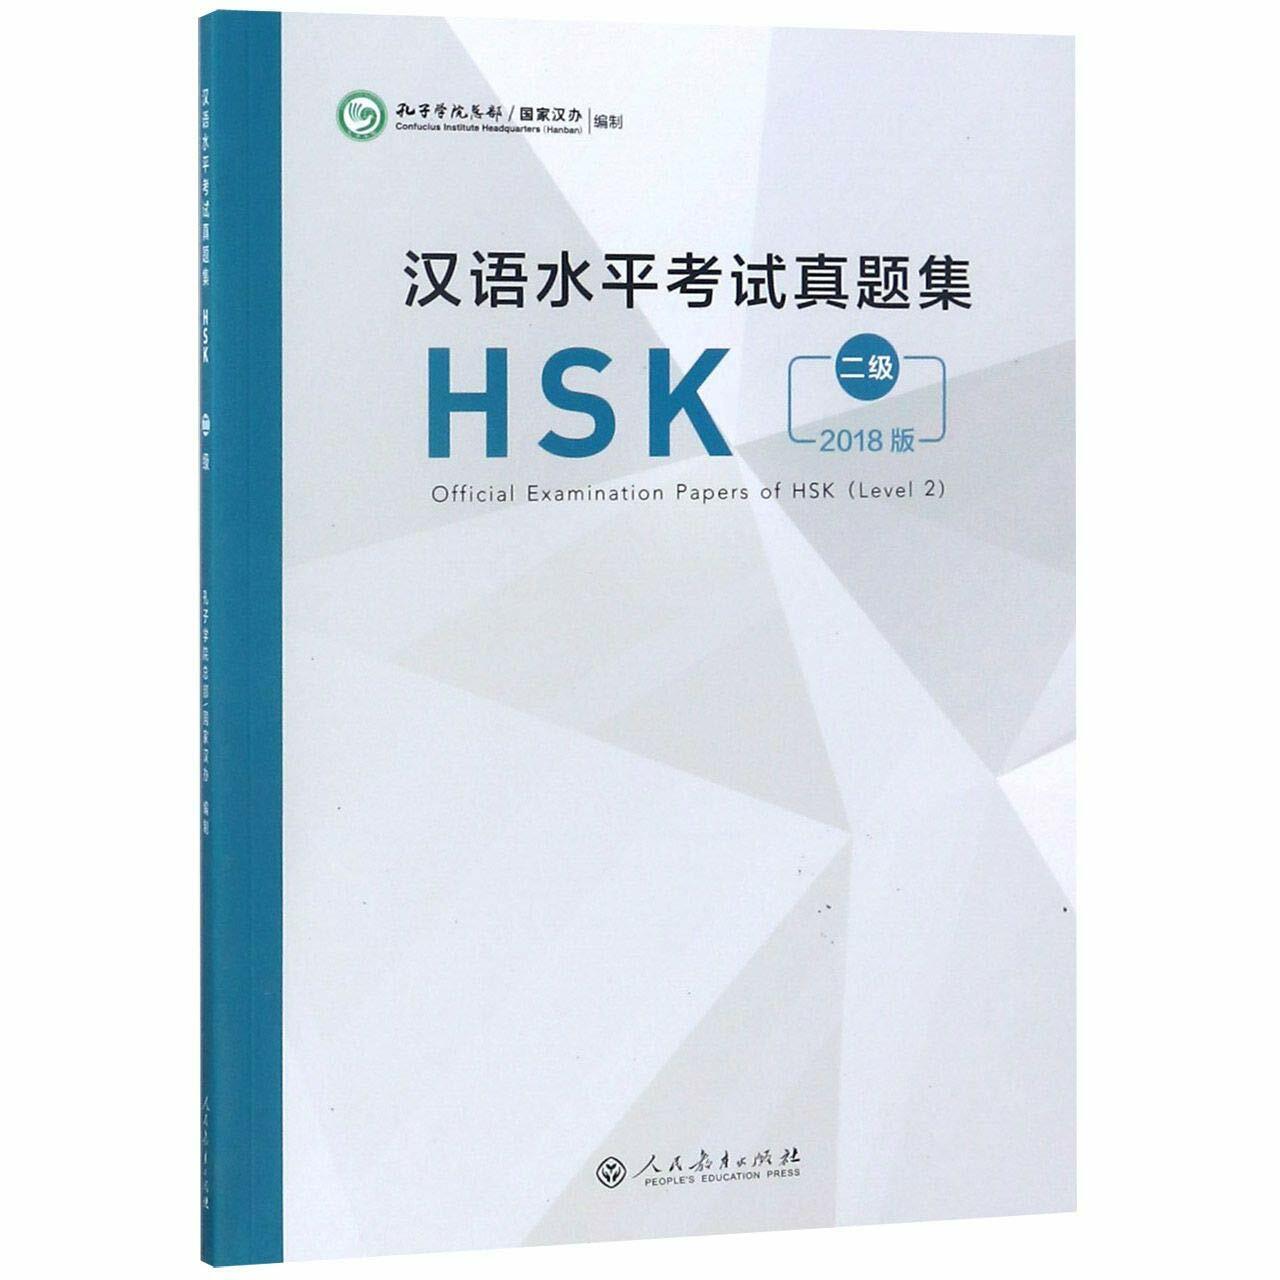 Official Examination Papers of HSK (Level 2) (Paperback)